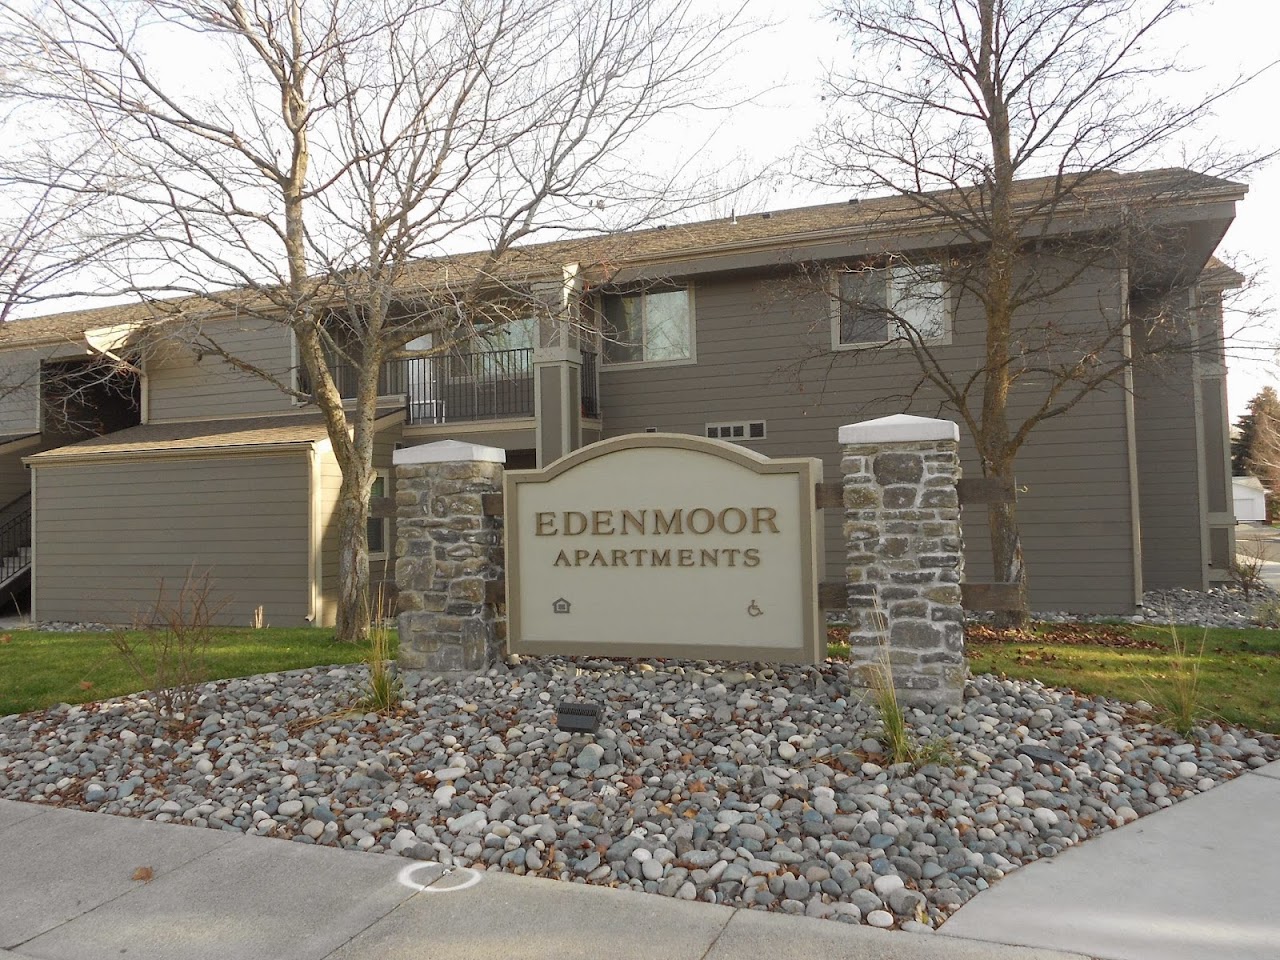 Photo of EDENMOOR. Affordable housing located at 308 GRANT STREET MOSCOW, ID 83843